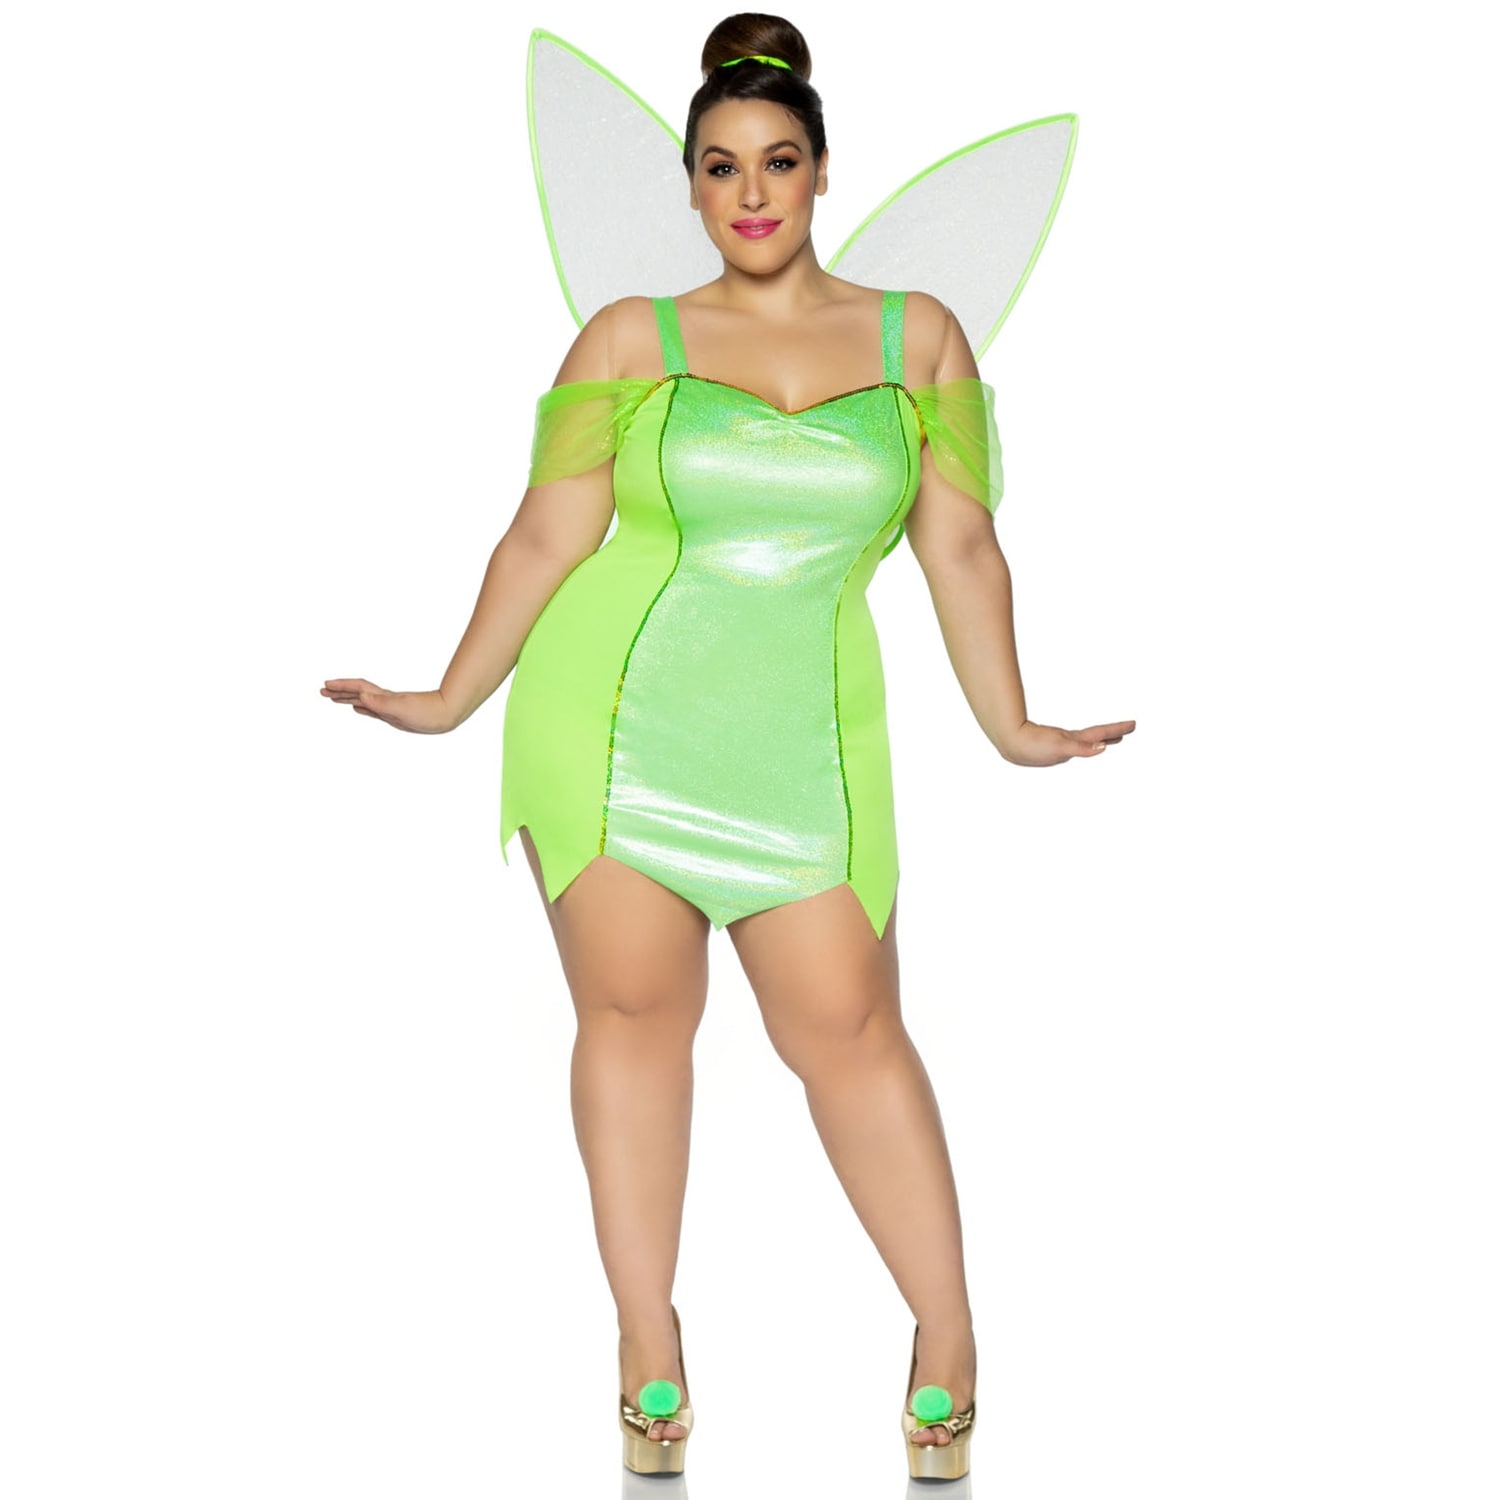 Ladies Fairy Nymph Pixie Halloween Fancy Dress Costume Outfit UK 8-26 Plus Size